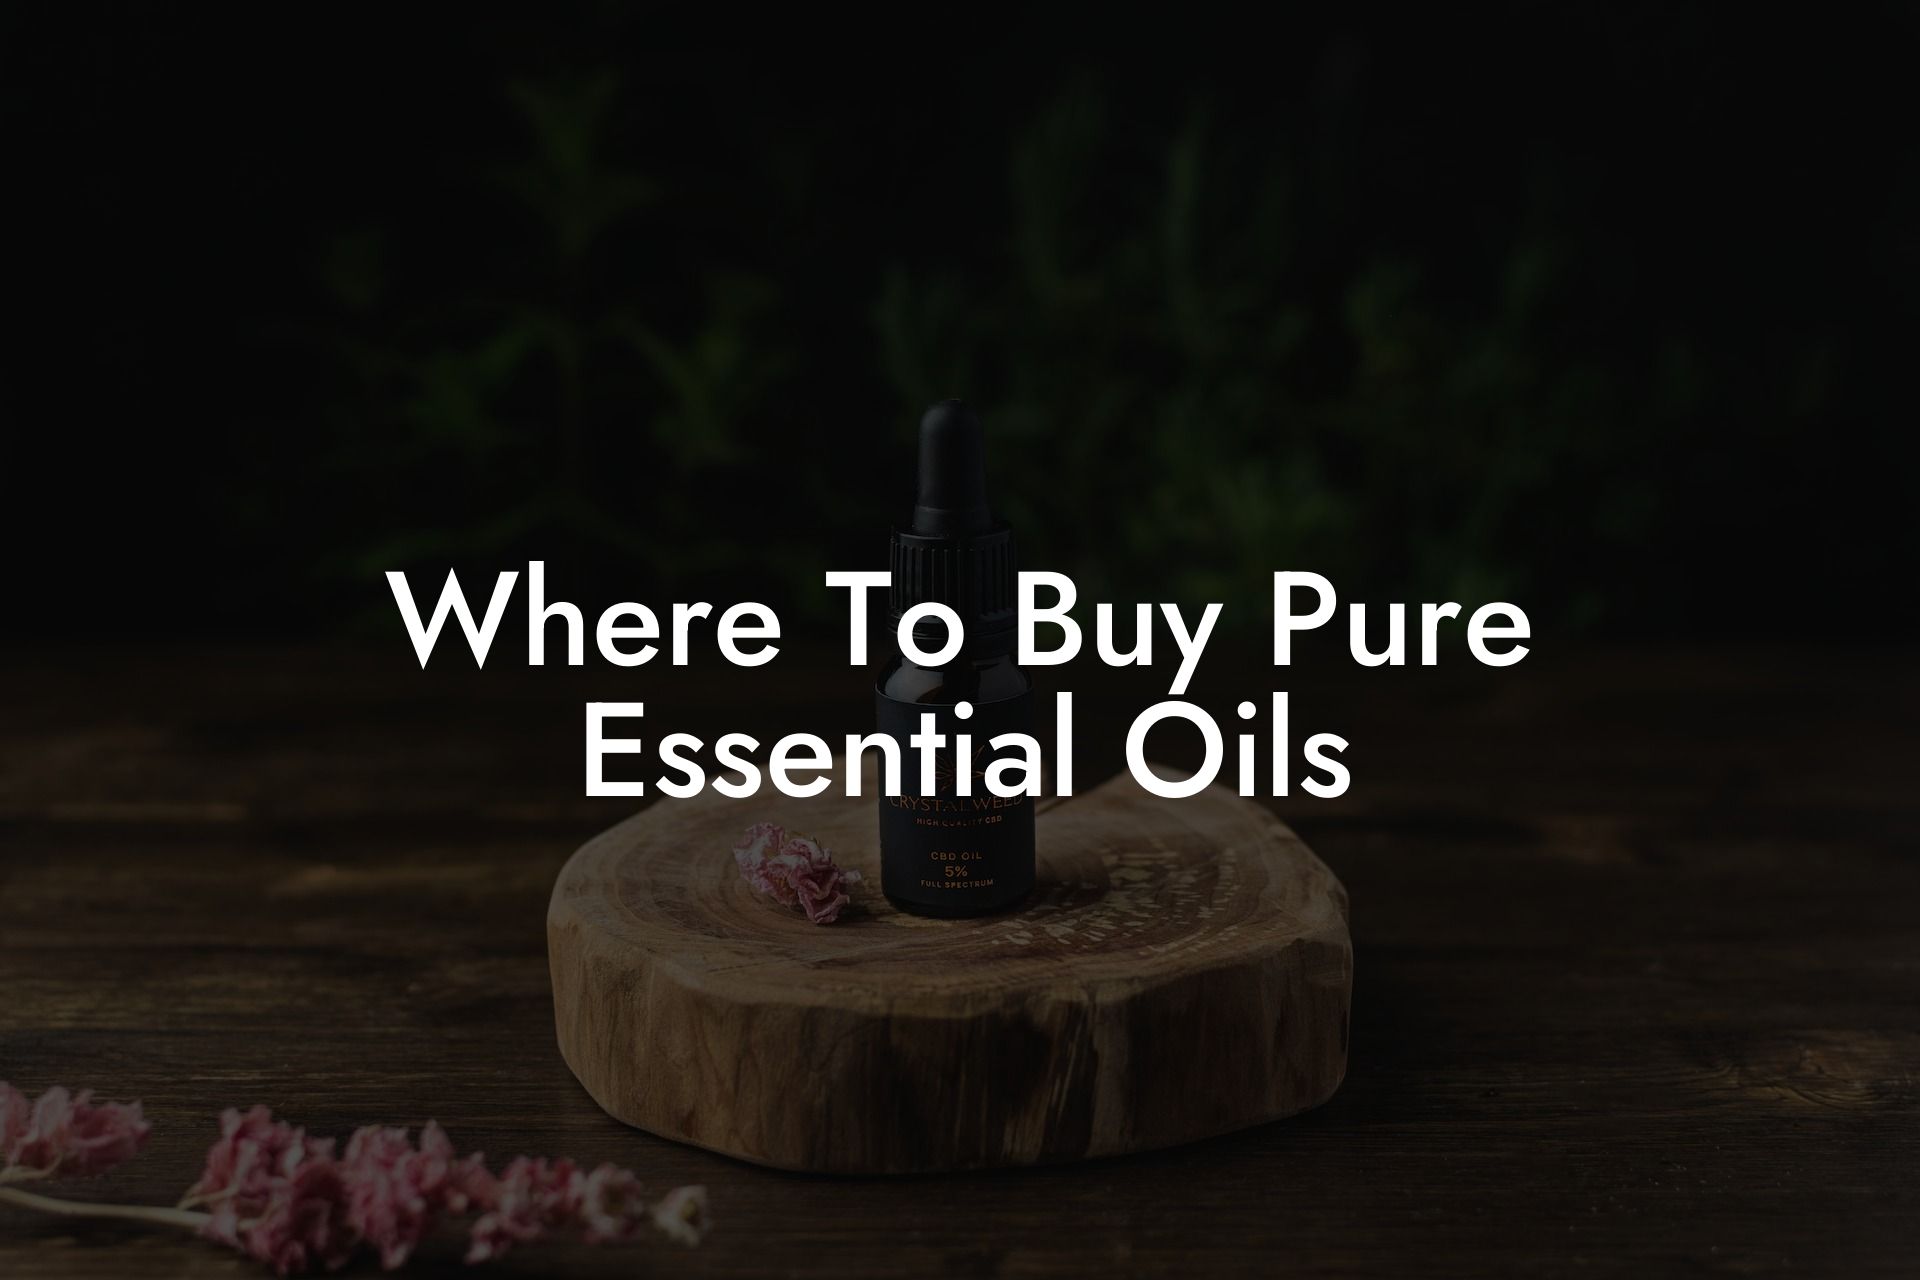 Where To Buy Pure Essential Oils